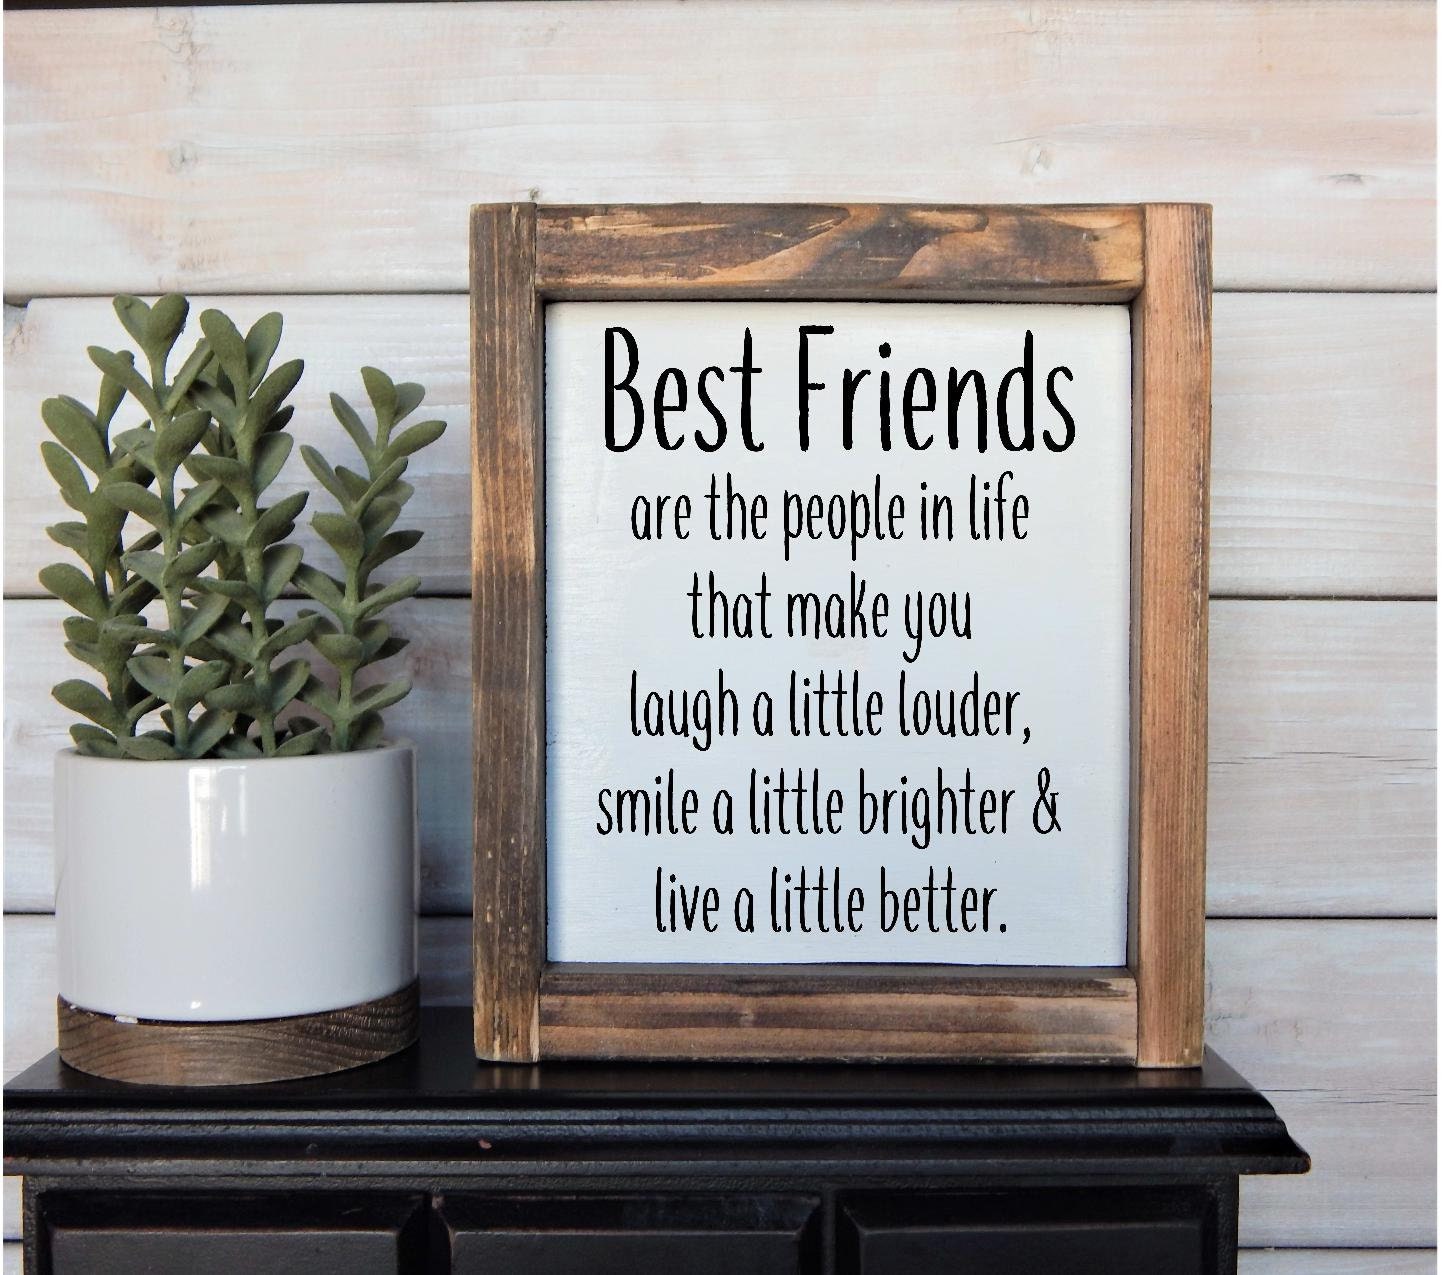 Best Friends are ... Wood Framed Friend Sign Friend Gift | Etsy